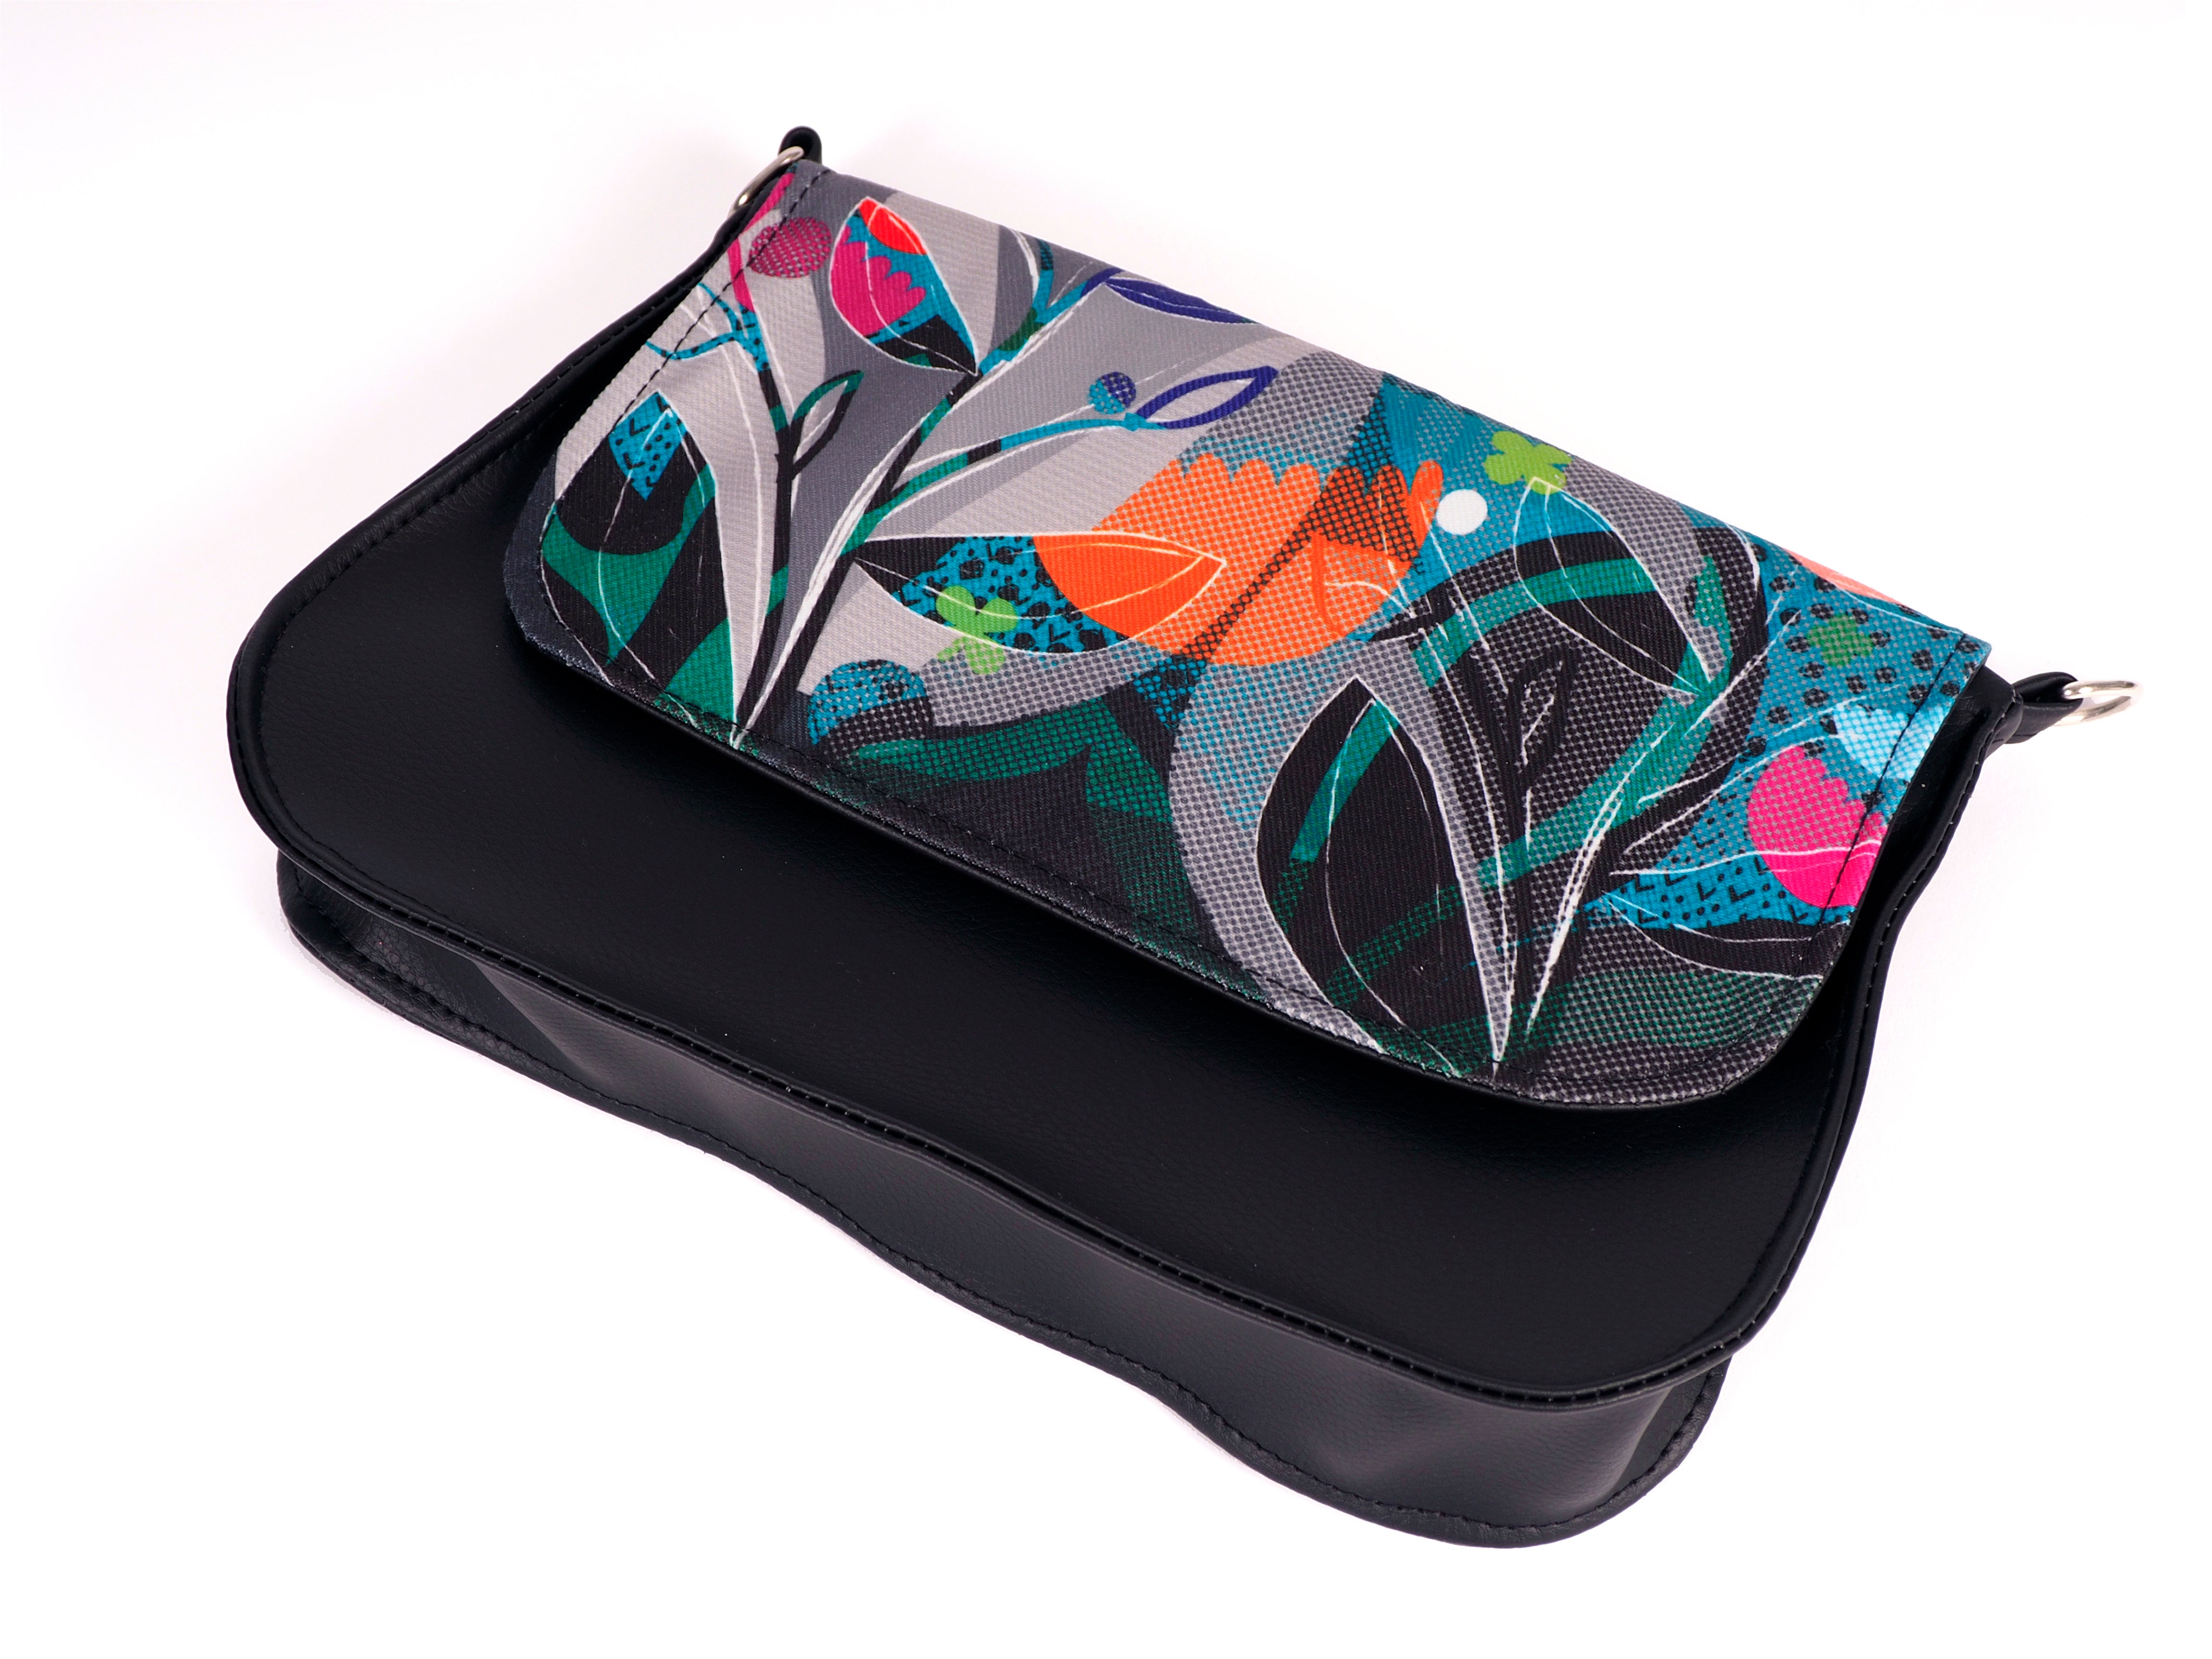 Bardo box bag - Waiting for the dawn - Premium bardo box bag from vintage garden - Just lvblack, floral, flowers, gift, gray, green, handemade, leaves, nature, ping, vegan leather, Waiting for the dawn, woman52.00! Shop now at BARDO ART WORKS